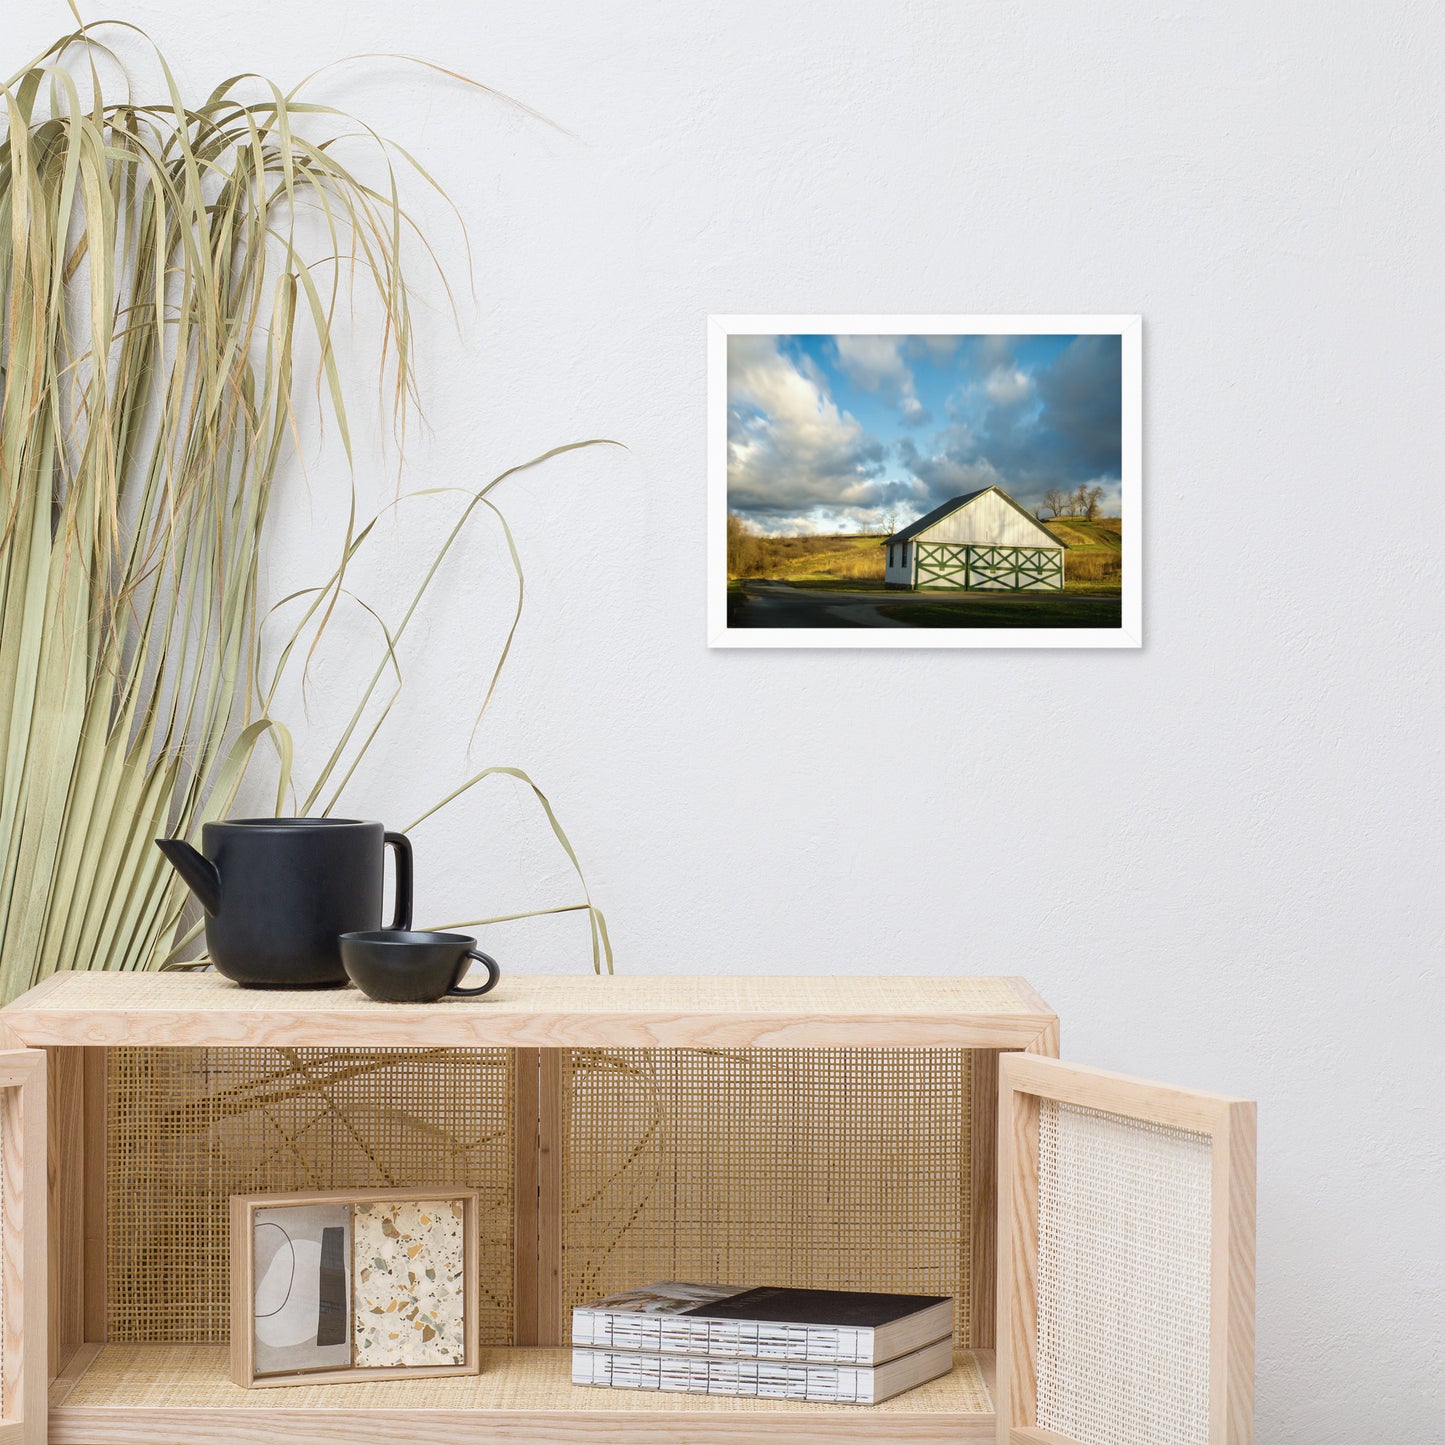 Pictures To Hang Above Bed: Aging Barn in the Morning Sun - Rural / Country Style Landscape / Nature Photograph  Framed Wall Art Print - Wall Decor - Artwork